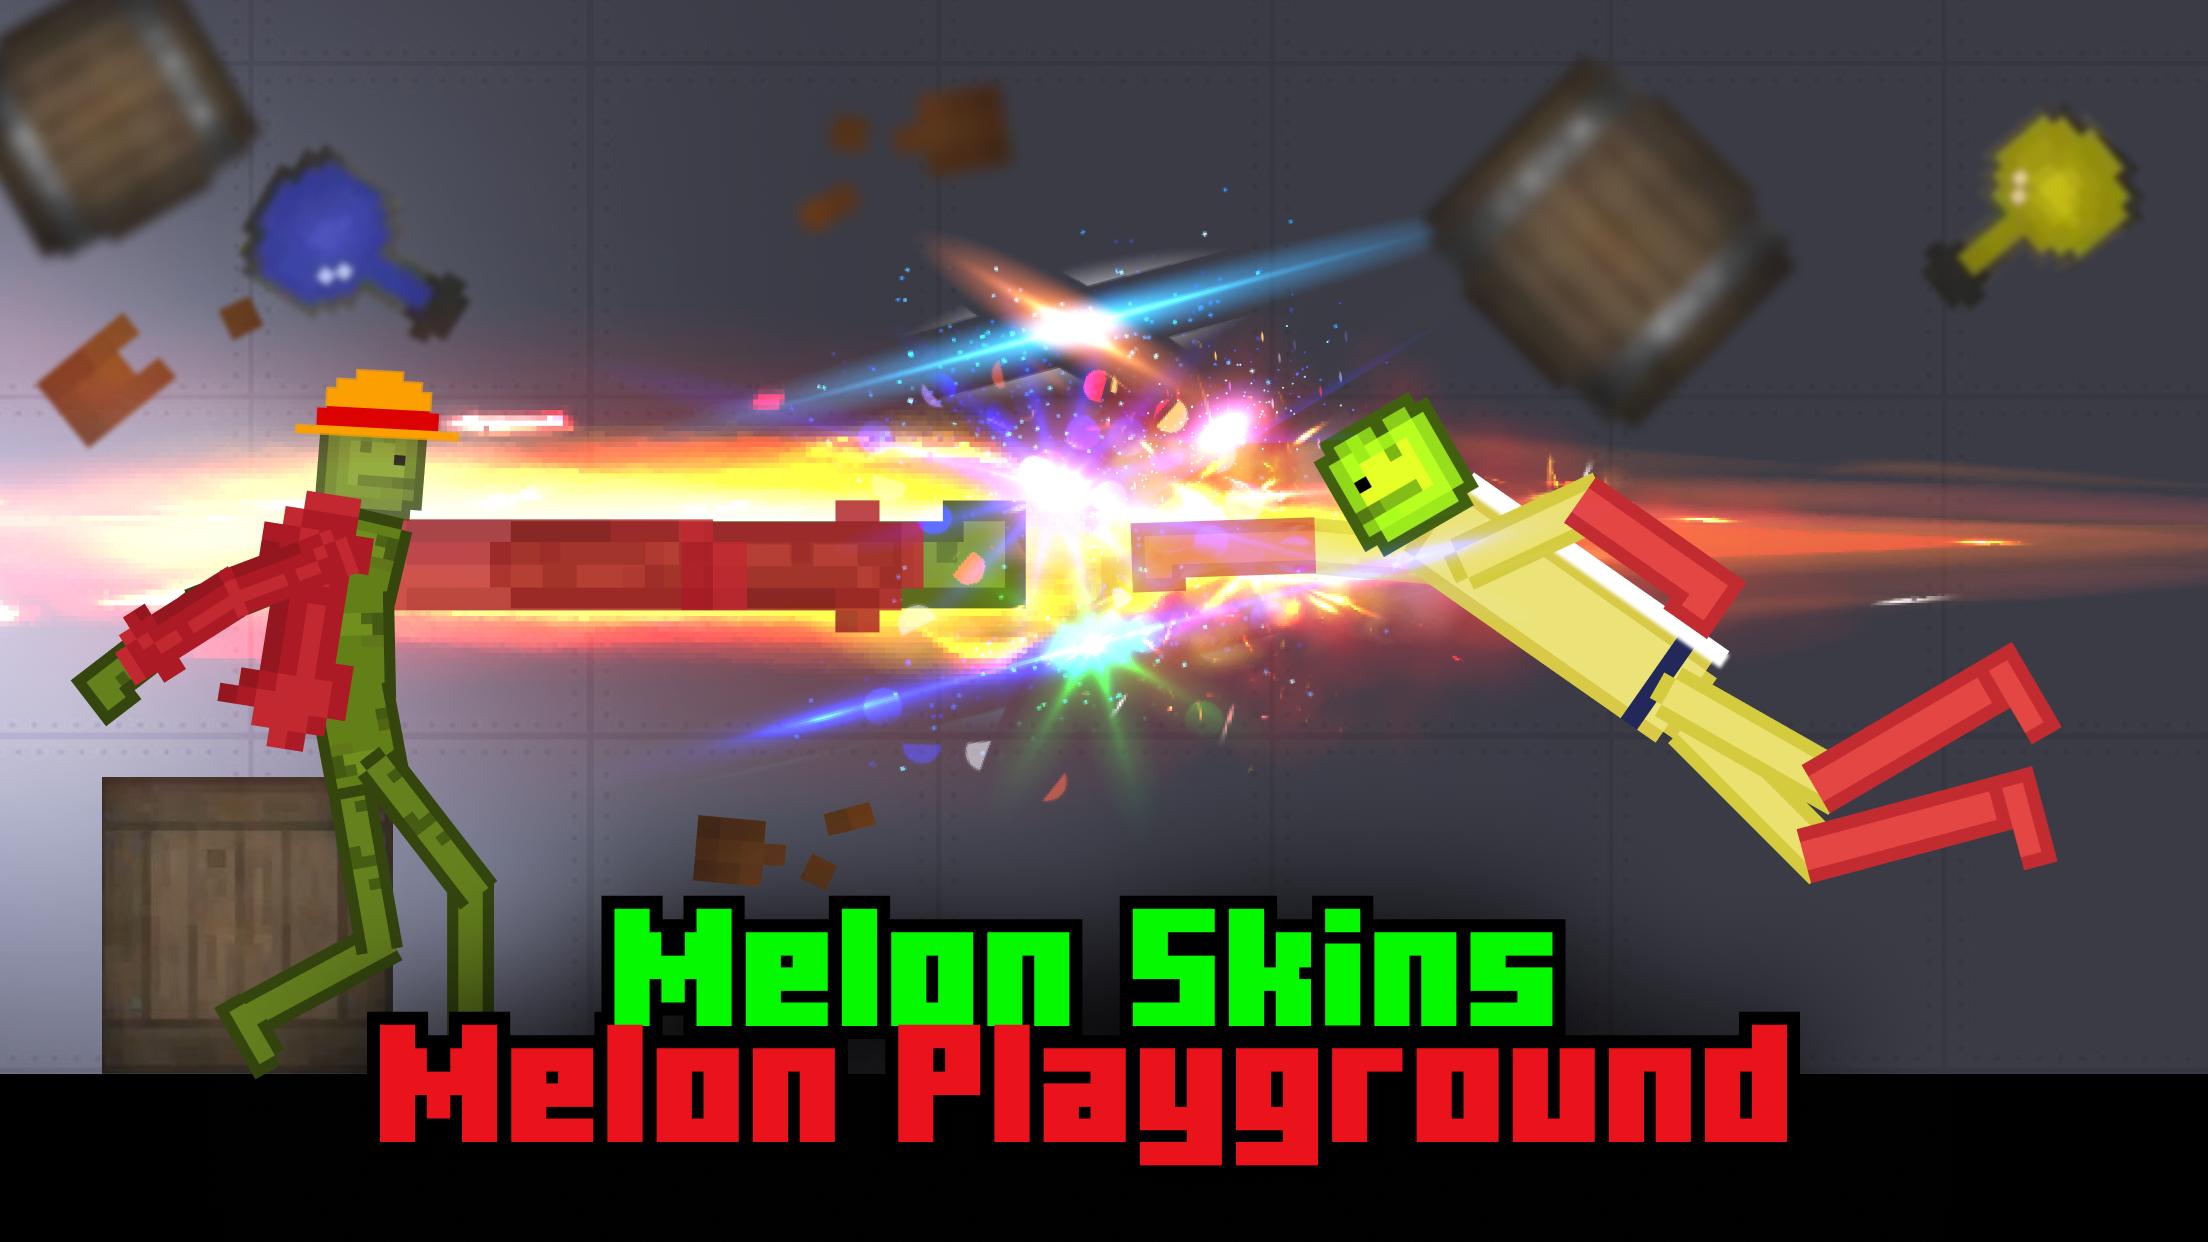 Download Mod&Skins for Melon Playground android on PC